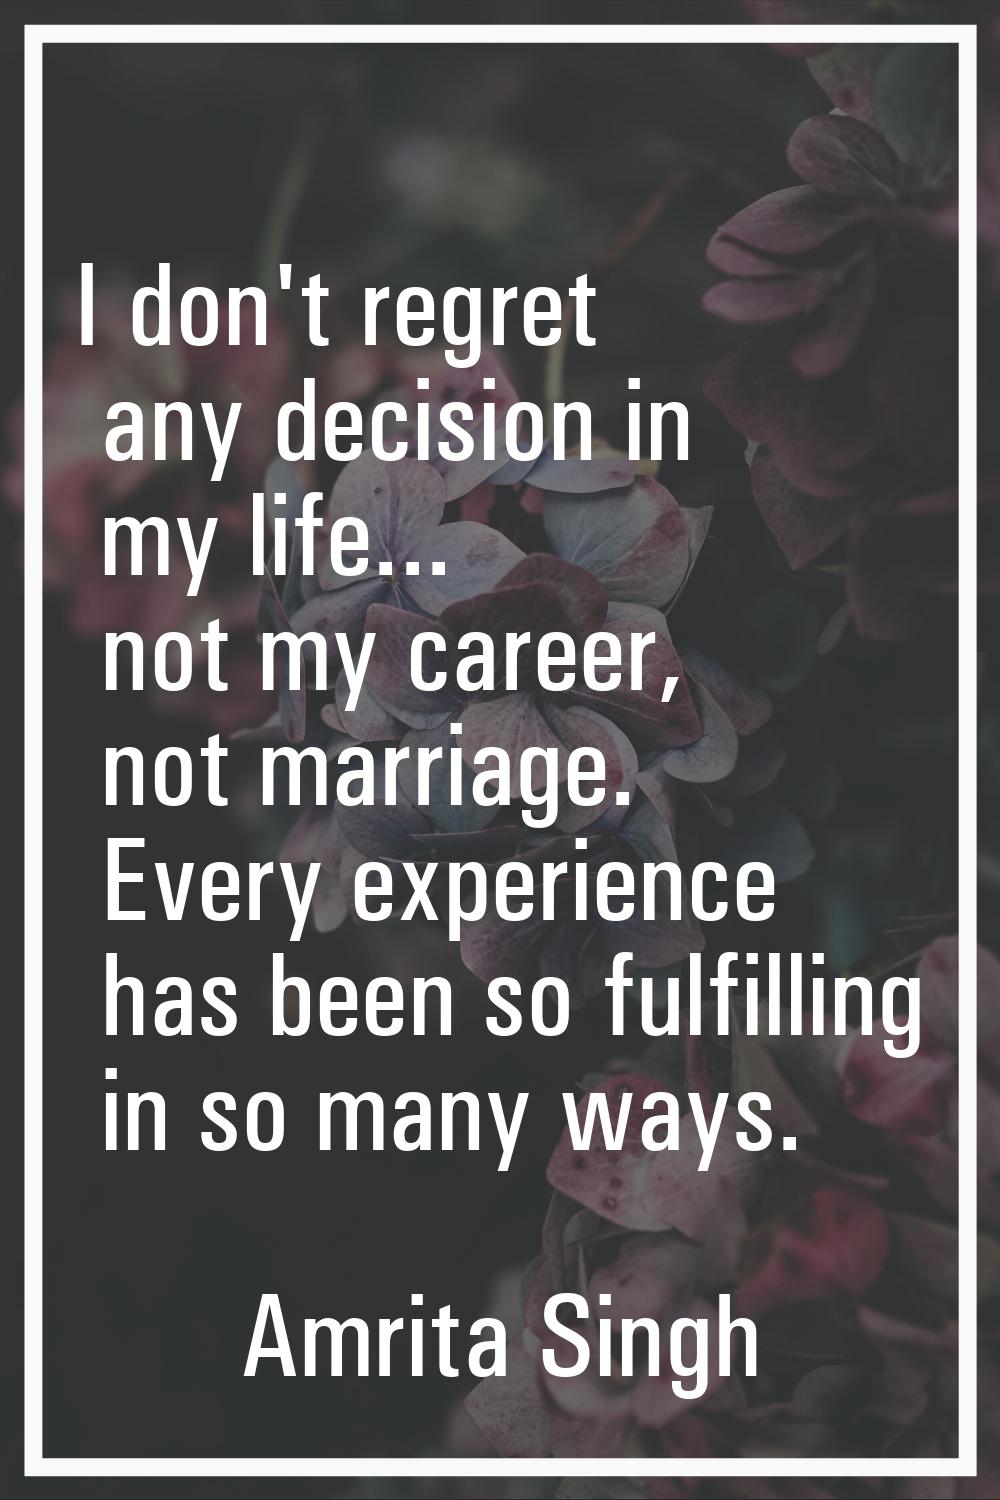 I don't regret any decision in my life... not my career, not marriage. Every experience has been so